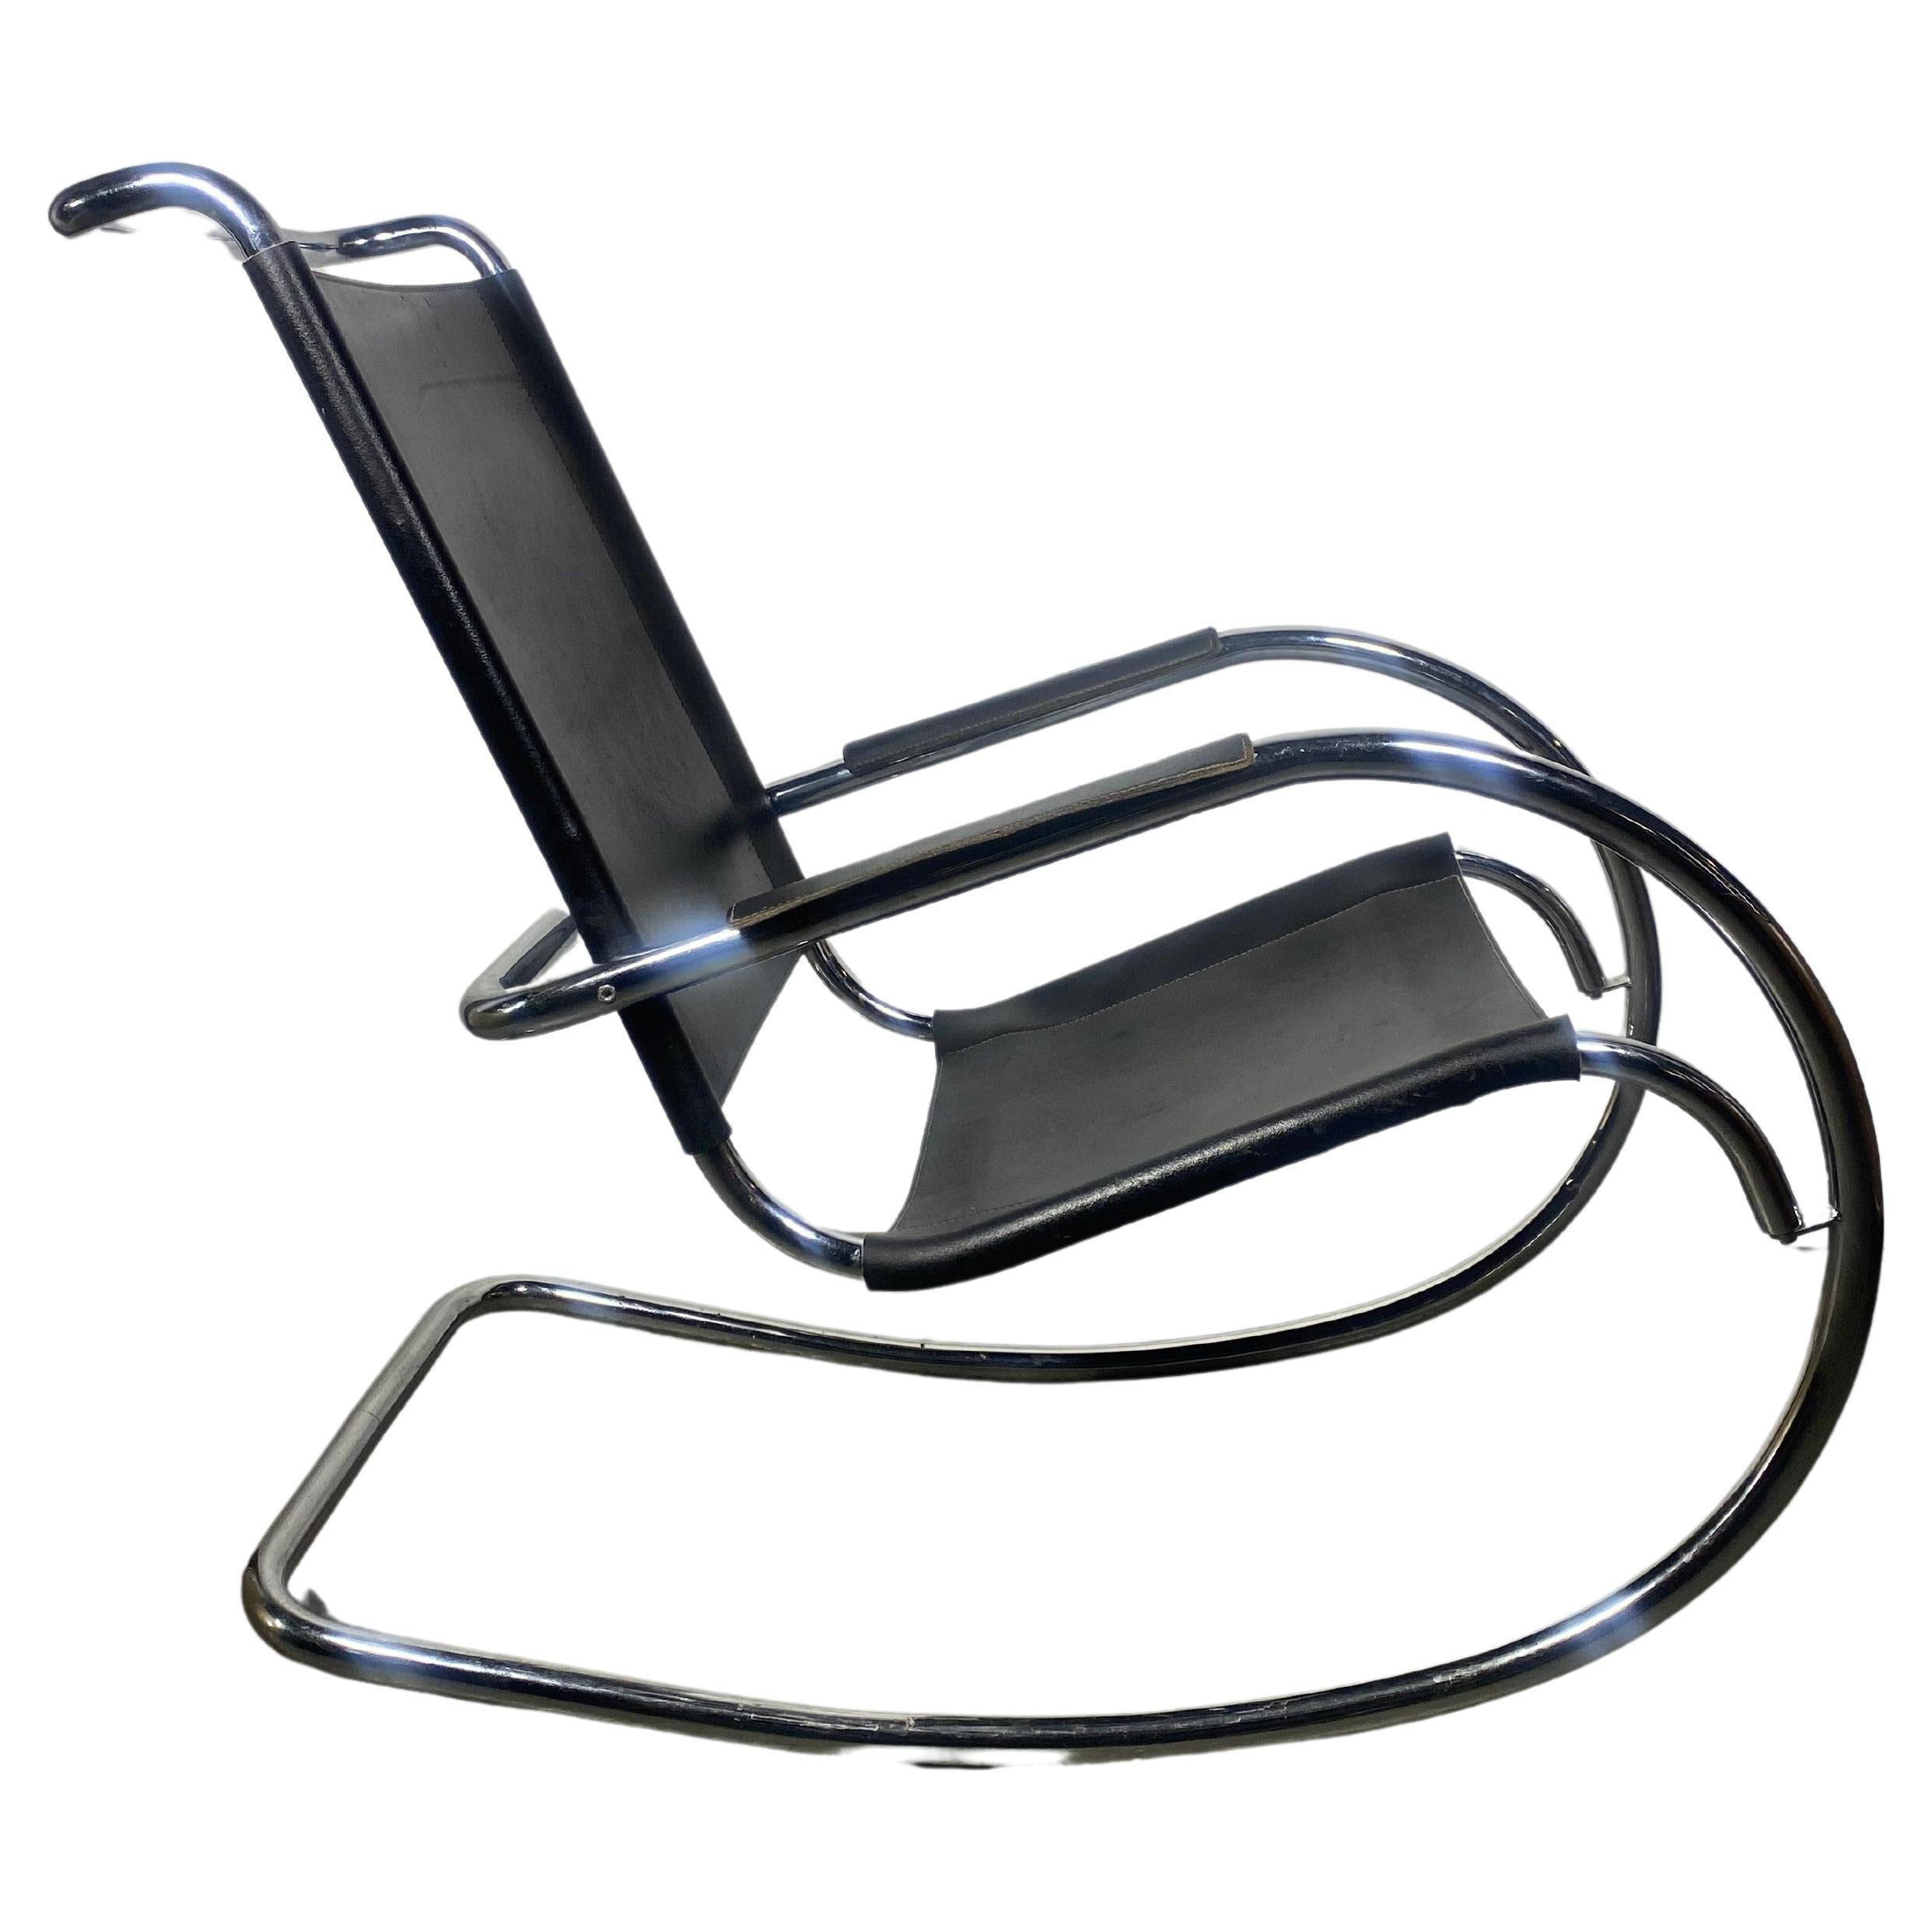 Classic Bauhaus style leather and chrome rocker, after Mies Van De Rohe, made in Italy, wonderful quality and construction, extremely comfortable, retains original MADE IN ITALY label., Hand delivery avail to New York City or anywhere en route from